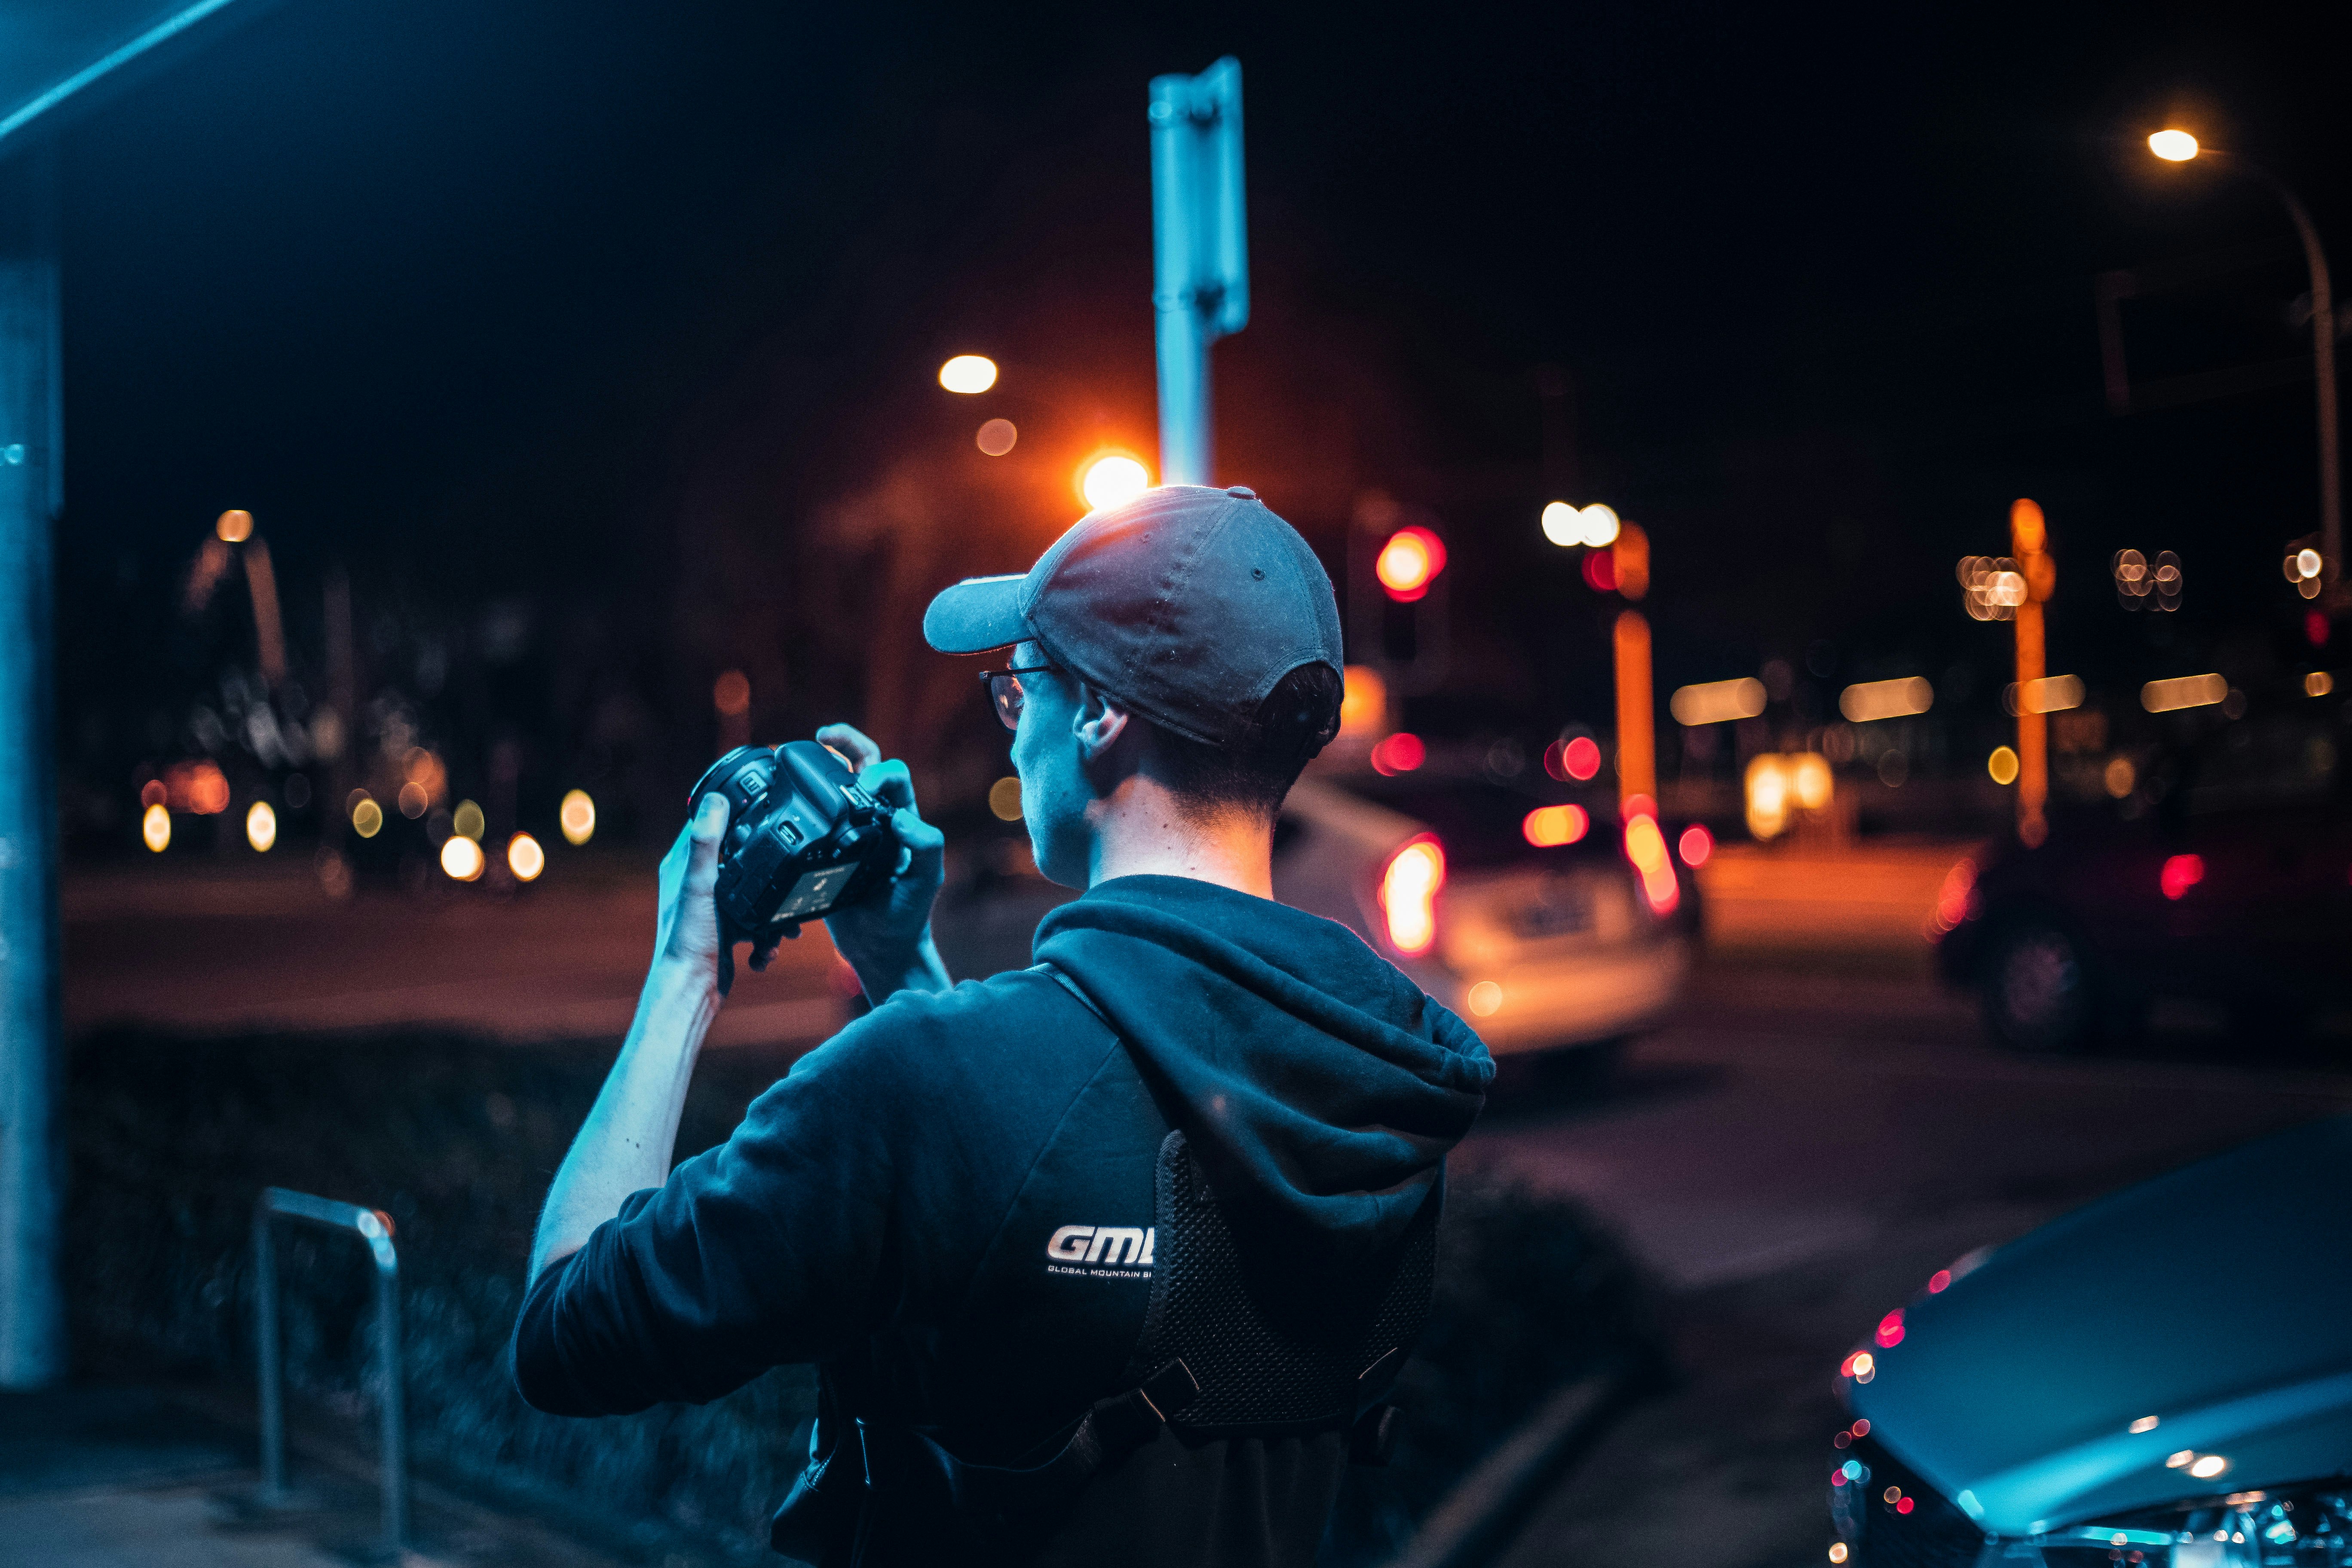 man in blue jacket taking photo of city during night time